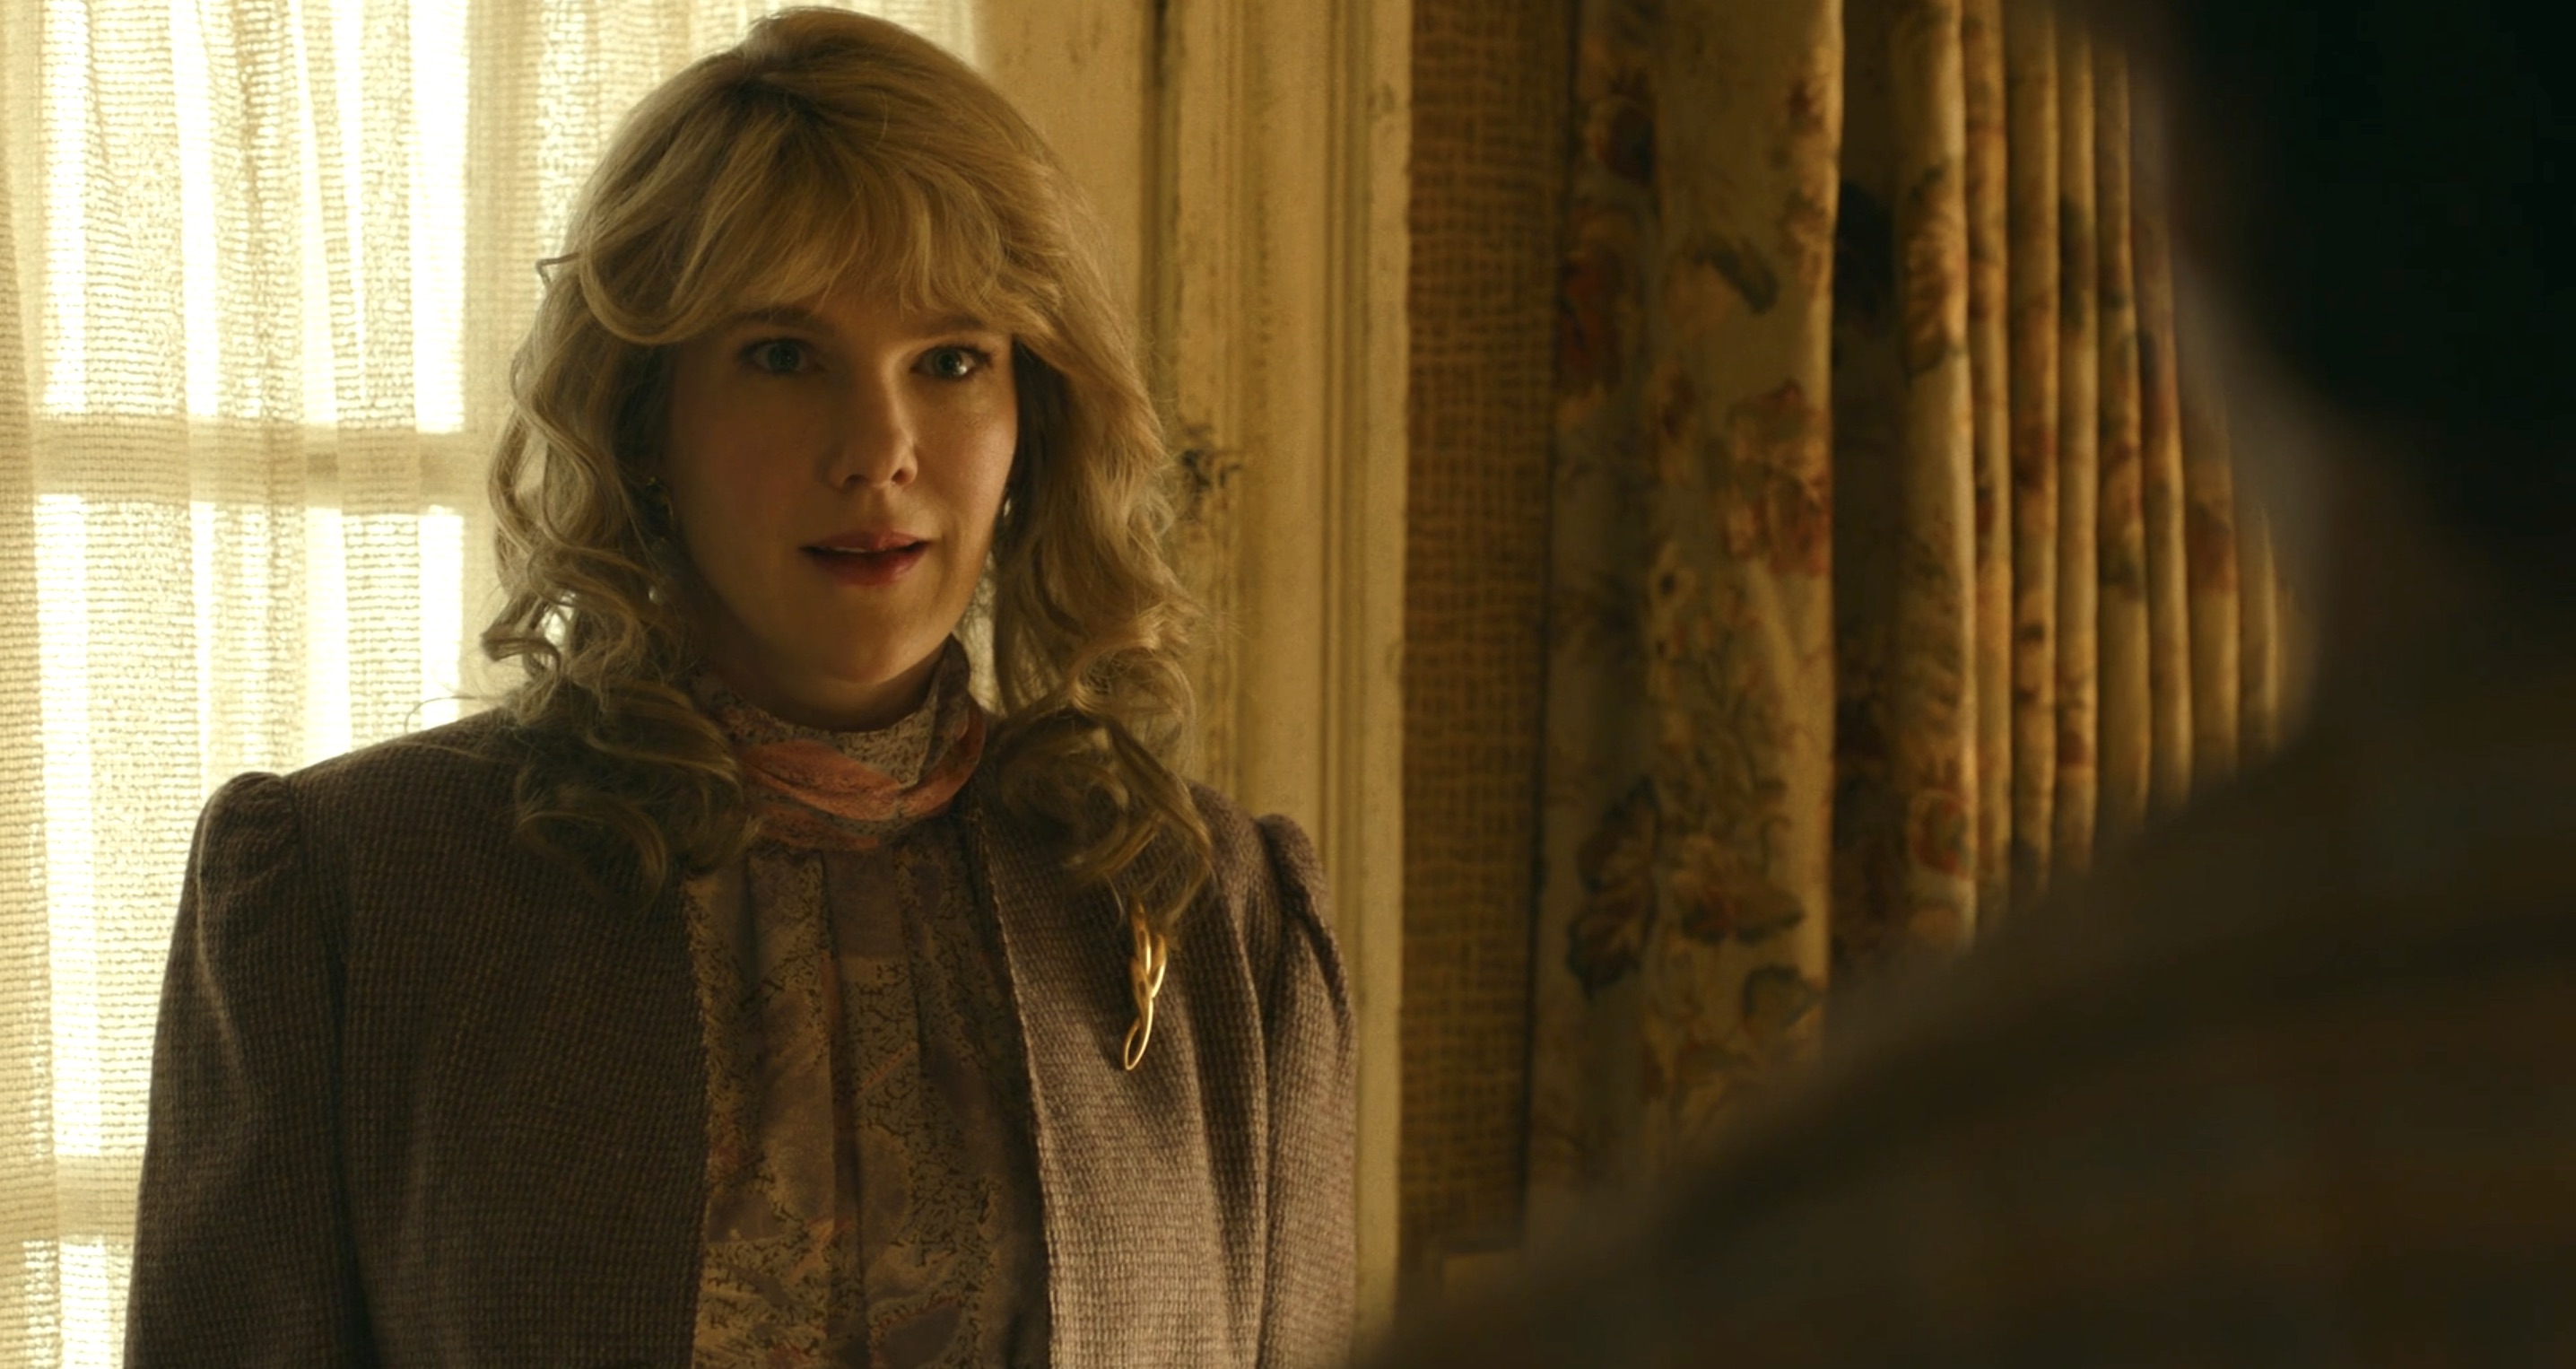 The Tender Bar Cast - Lily Rabe as Dorothy Moehringer